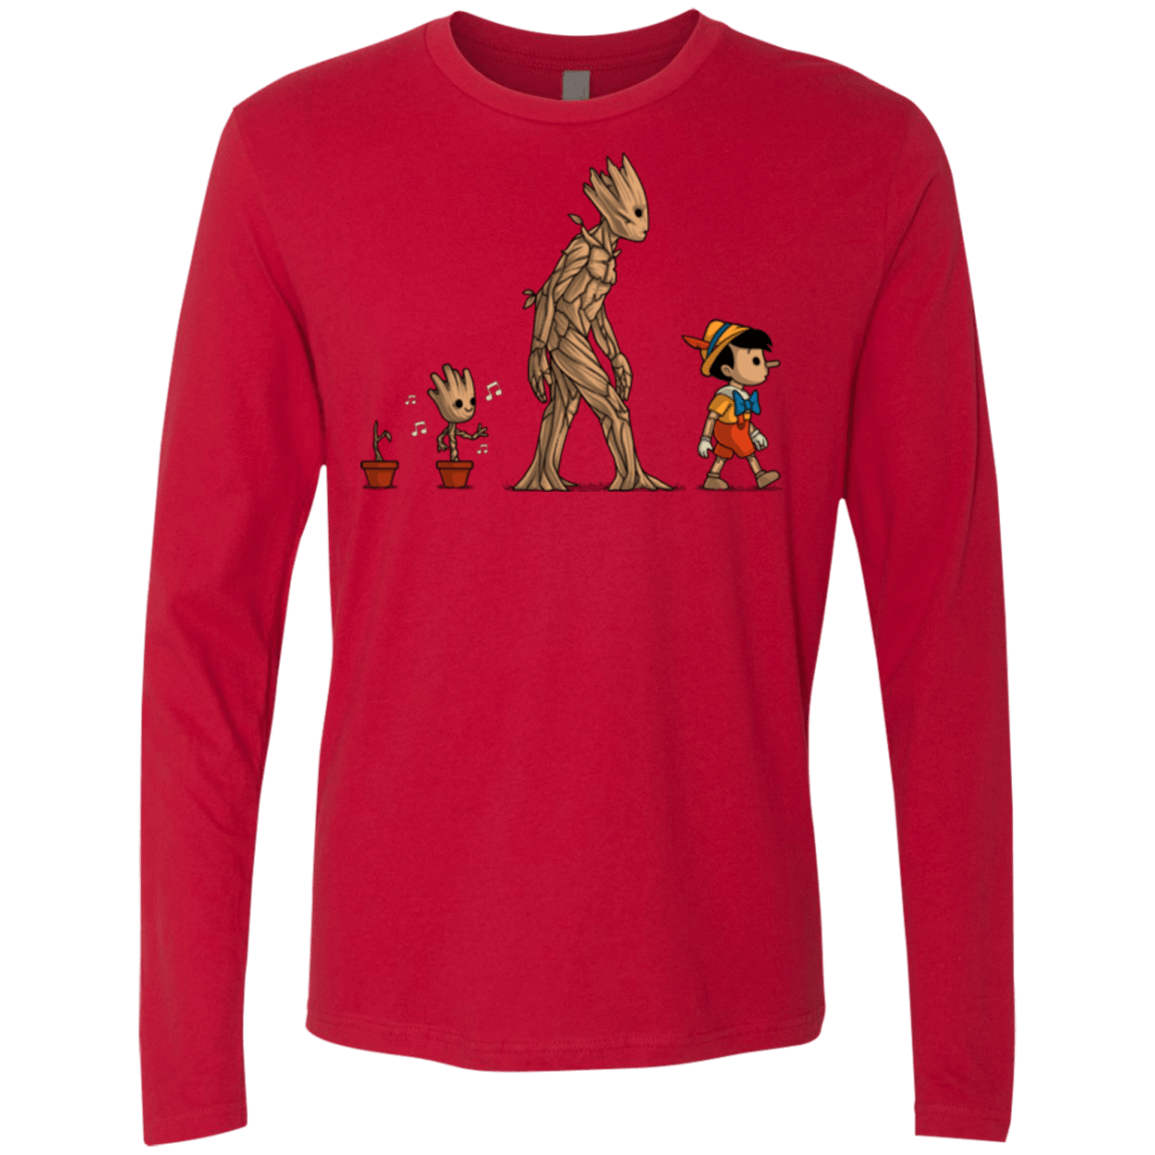 T-Shirts Red / Small Galactic Evolution Men's Premium Long Sleeve